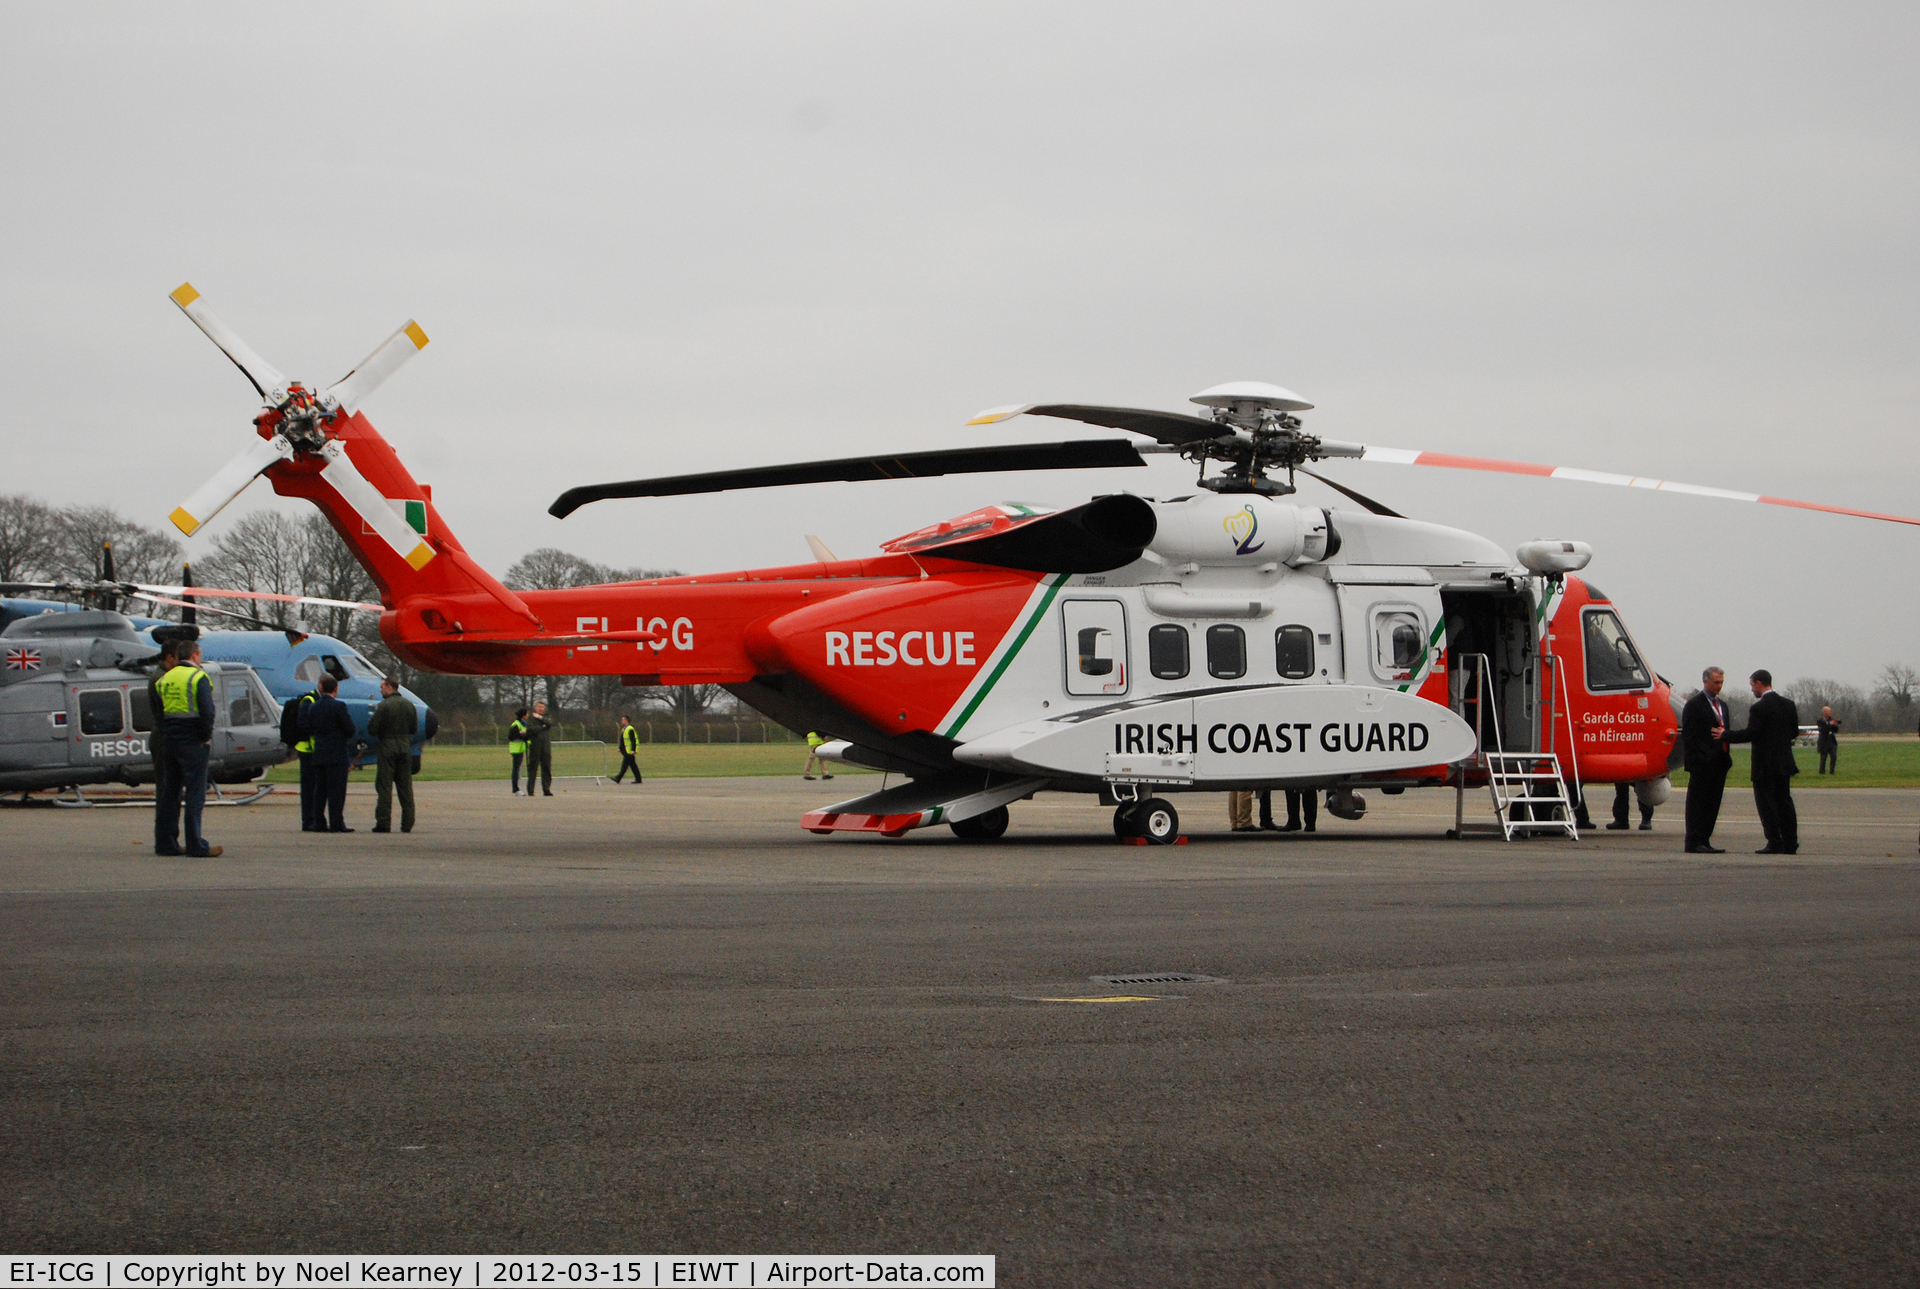 EI-ICG, 2011 Sikorsky S-92A C/N 920150, New S.92 been shown to the media on the apron at Weston.